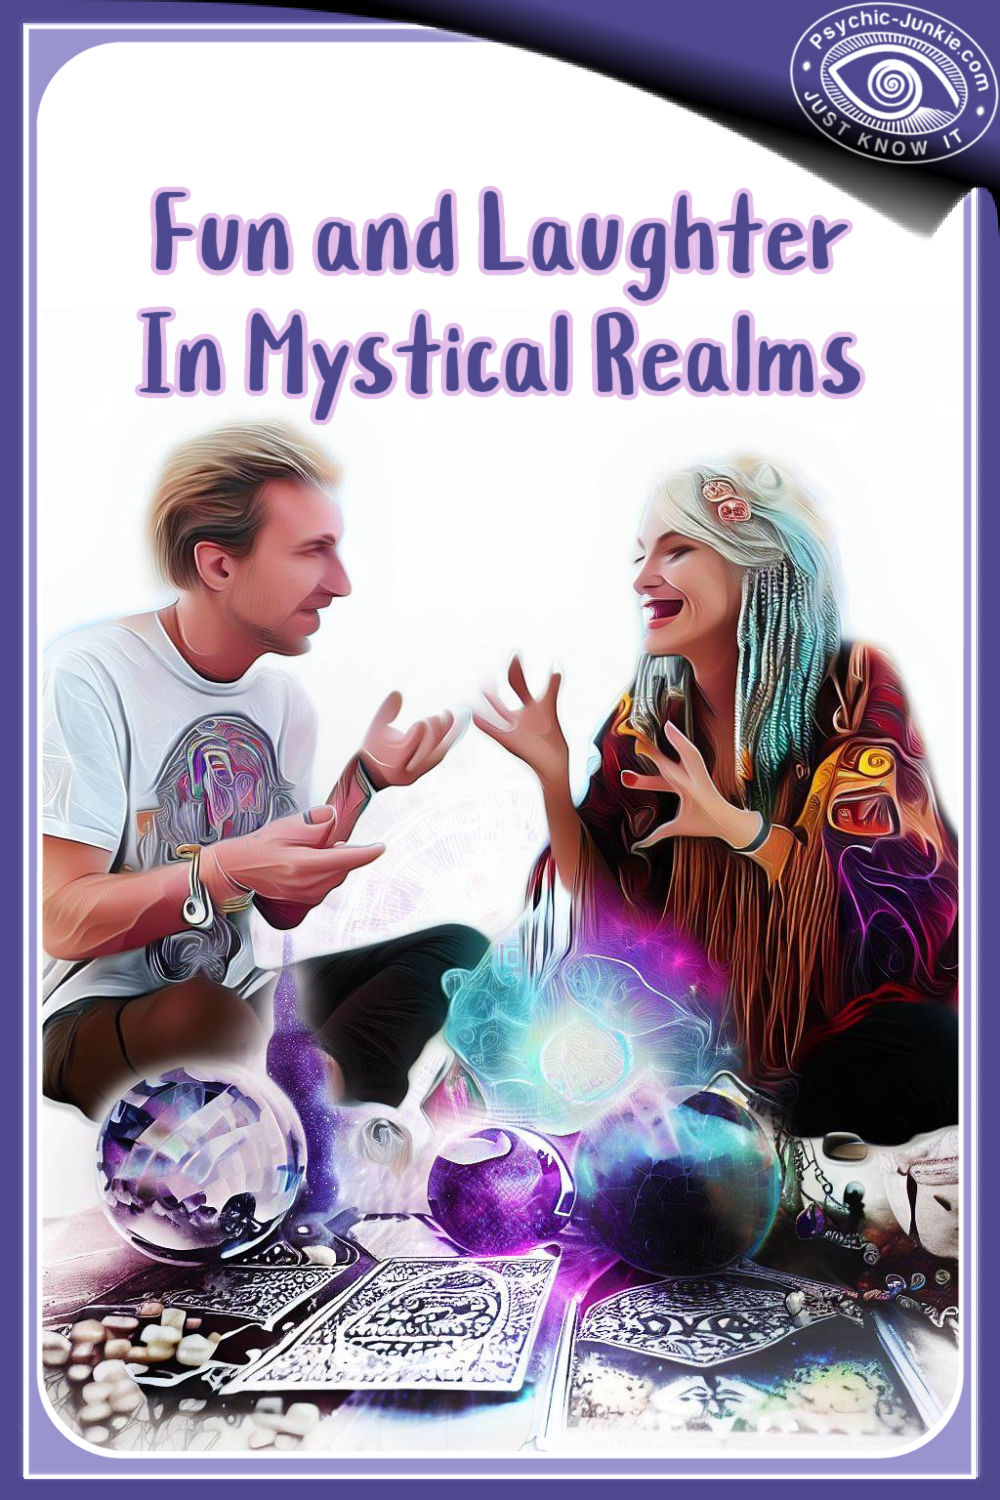 Sharing The Best Psychic Jokes In The World